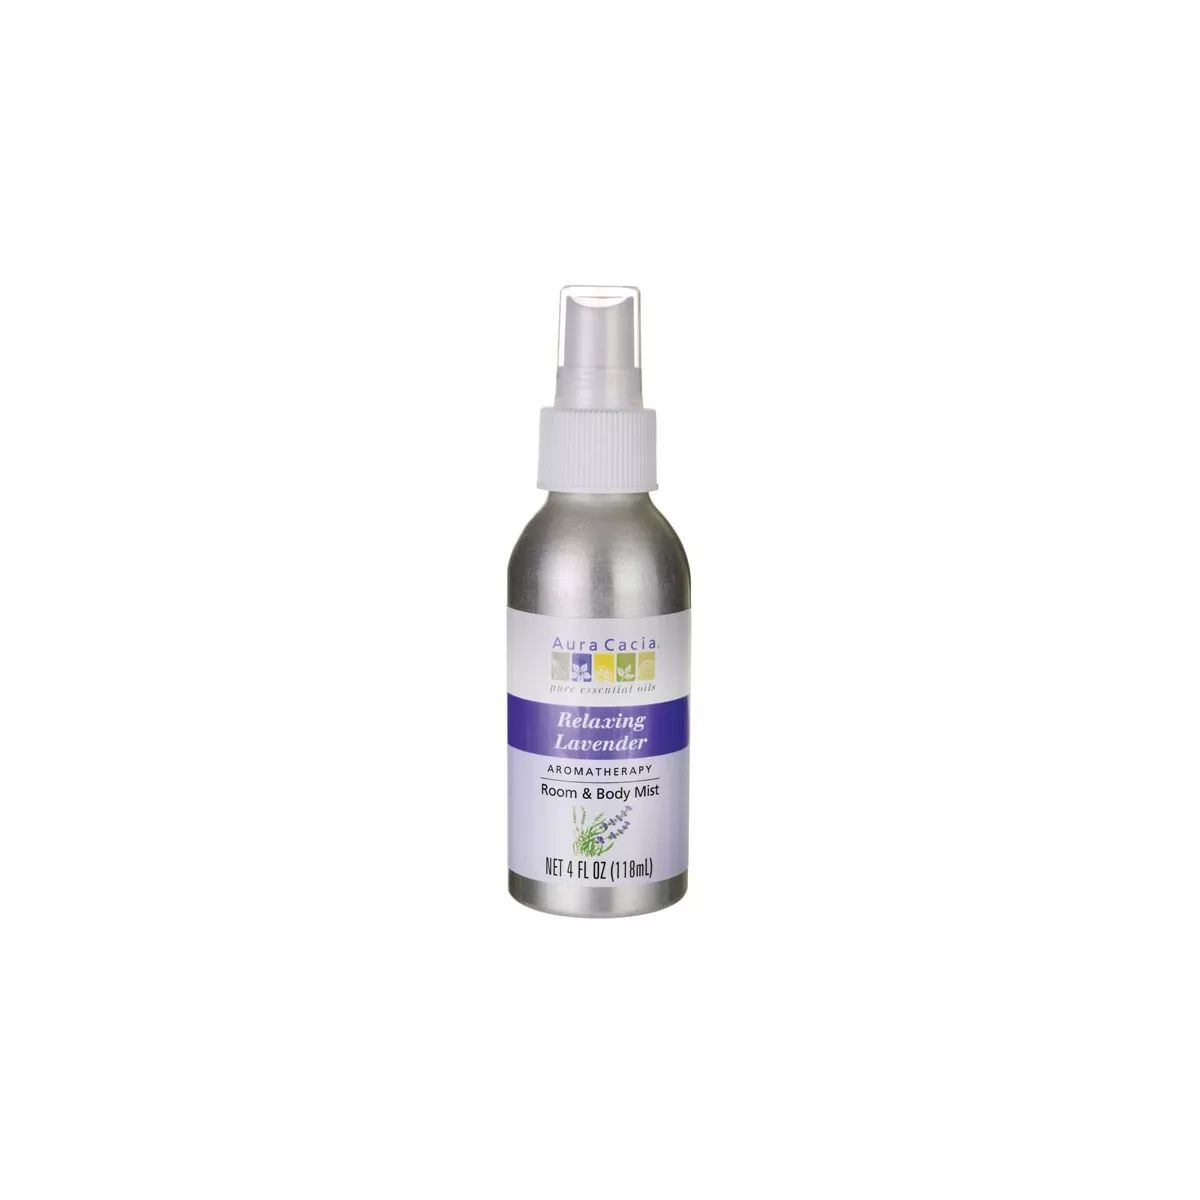 Aura Cacia Relaxing Lavender Room and Body Mist 4 fluid ounces | Target